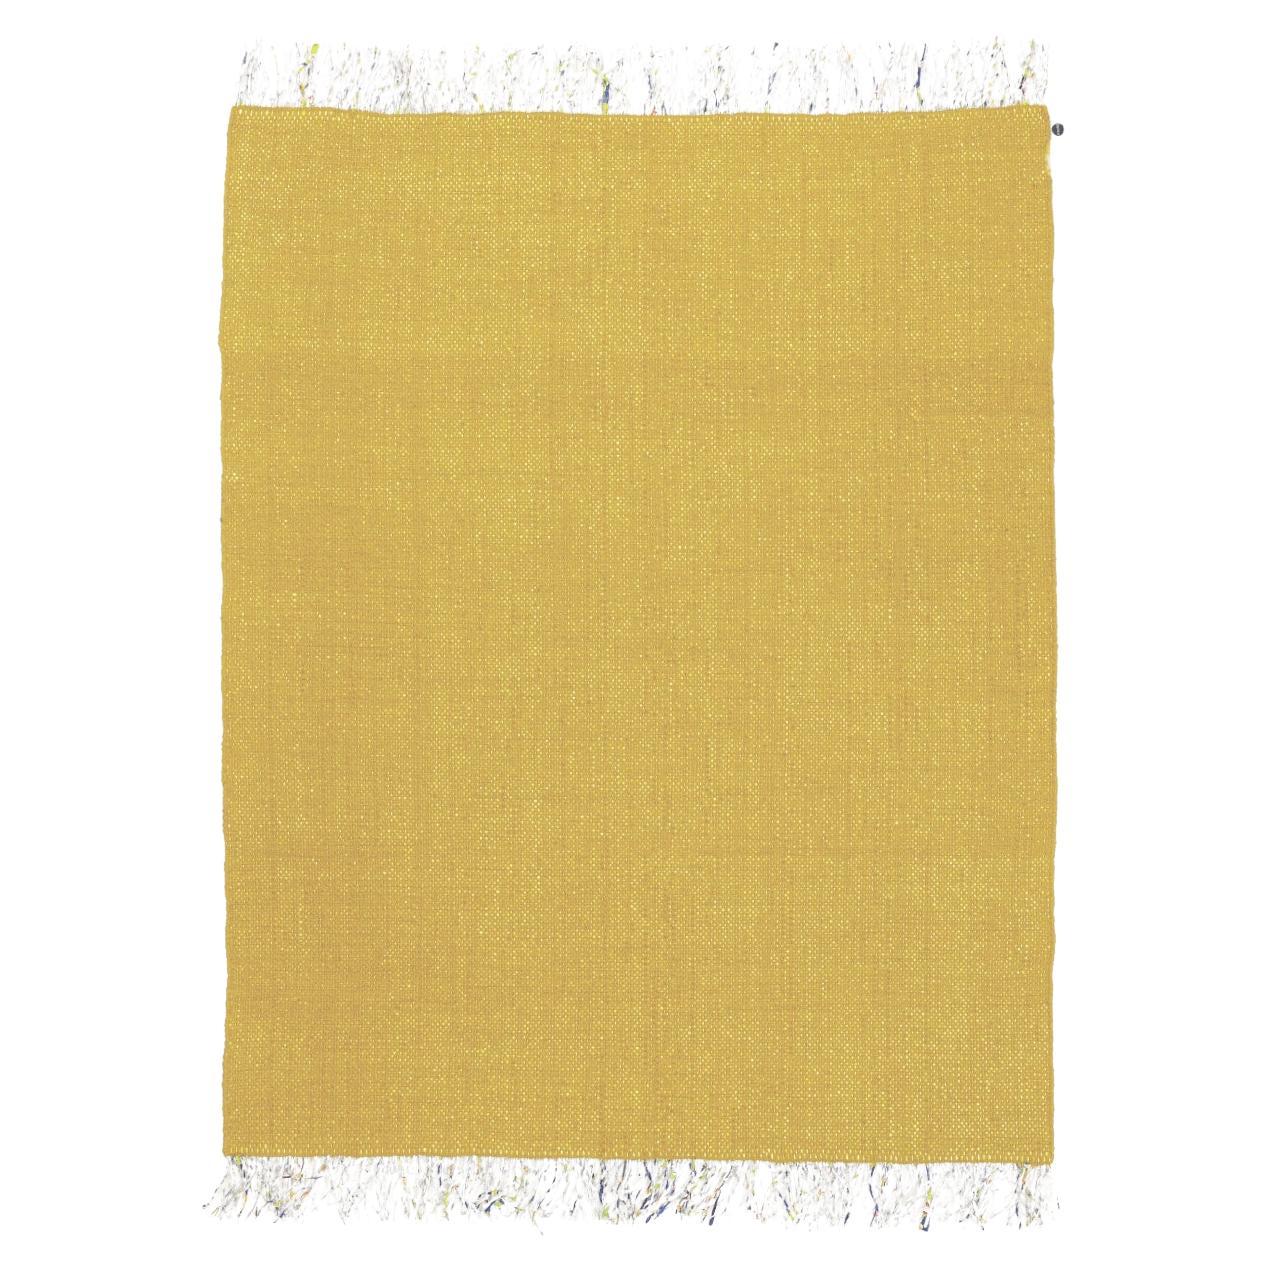 Candy Wrapper Rug_Dining_yellow/ Unique Award Winning Woven Rug by Jutta Werner